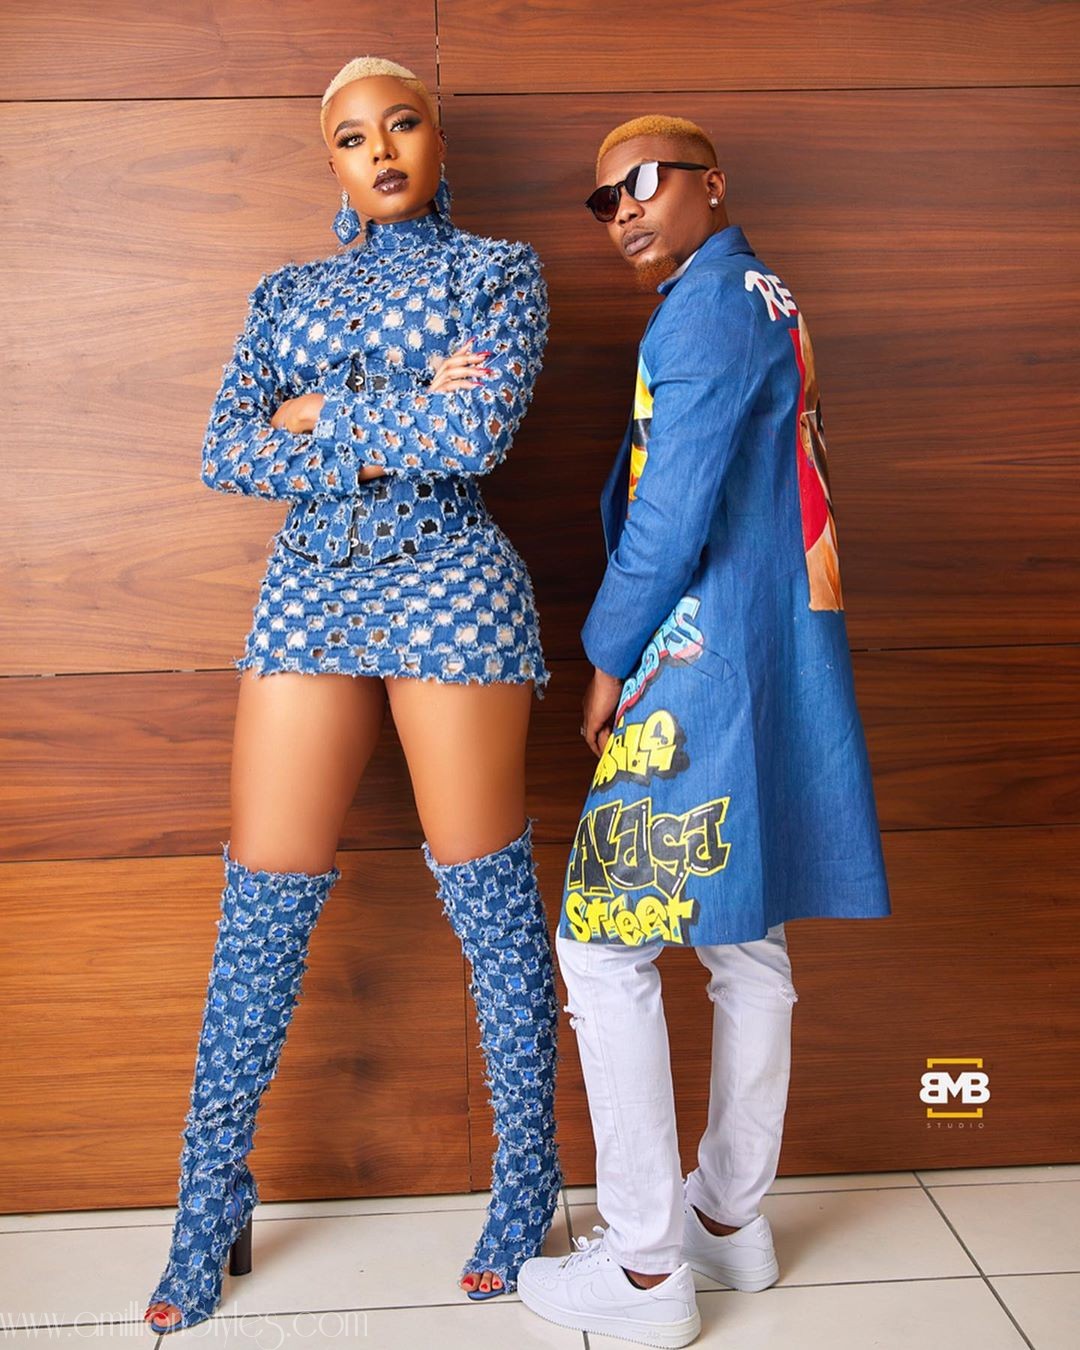 Styles From the 2019 Headies Awards